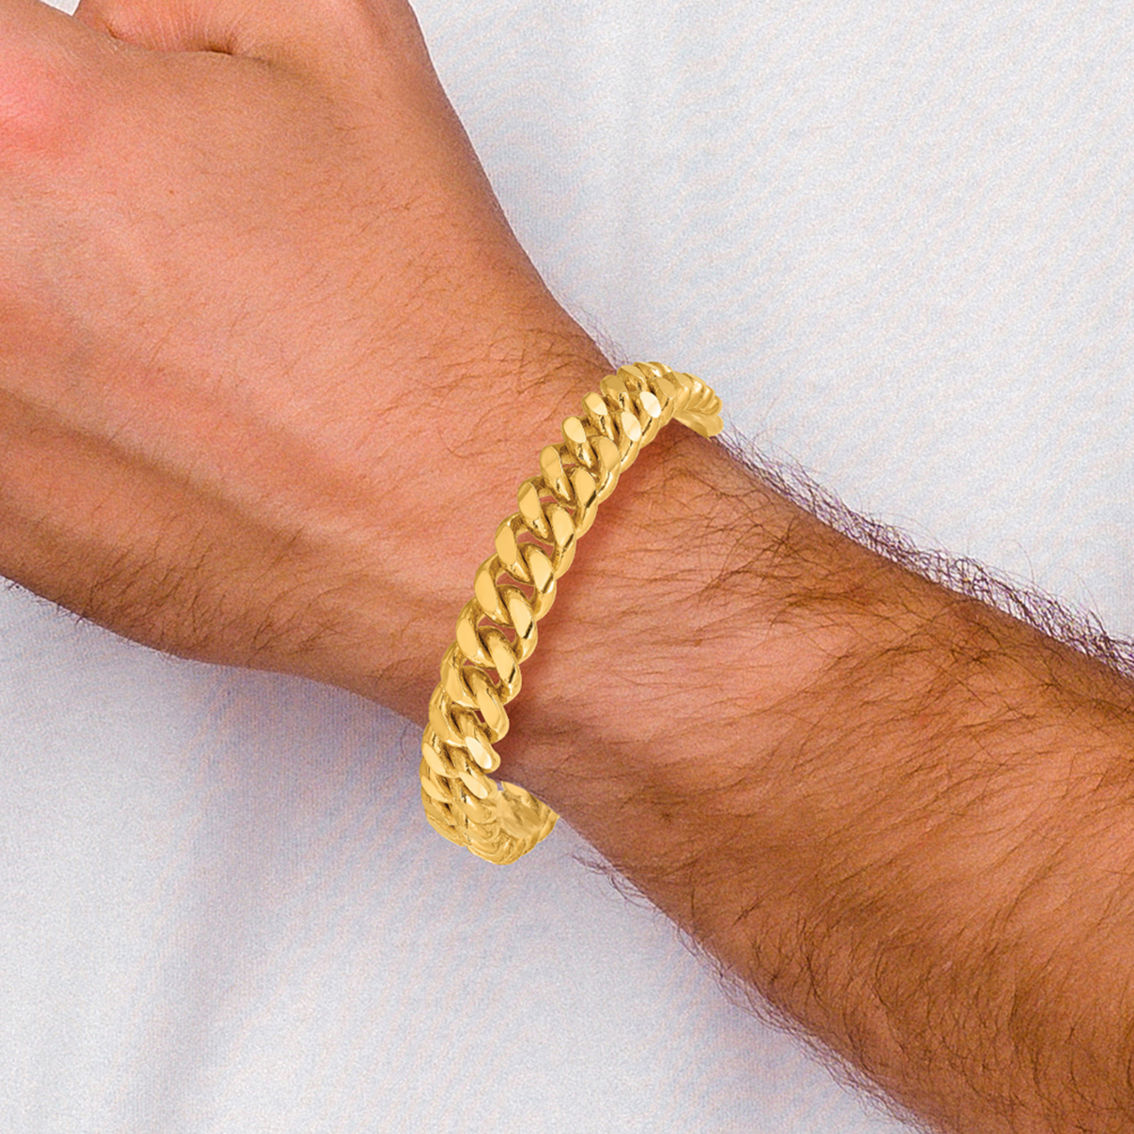 24K Pure Gold 24K Yellow Gold 12mm Solid Curb 8.5 in. Chain Bracelet - Image 5 of 5